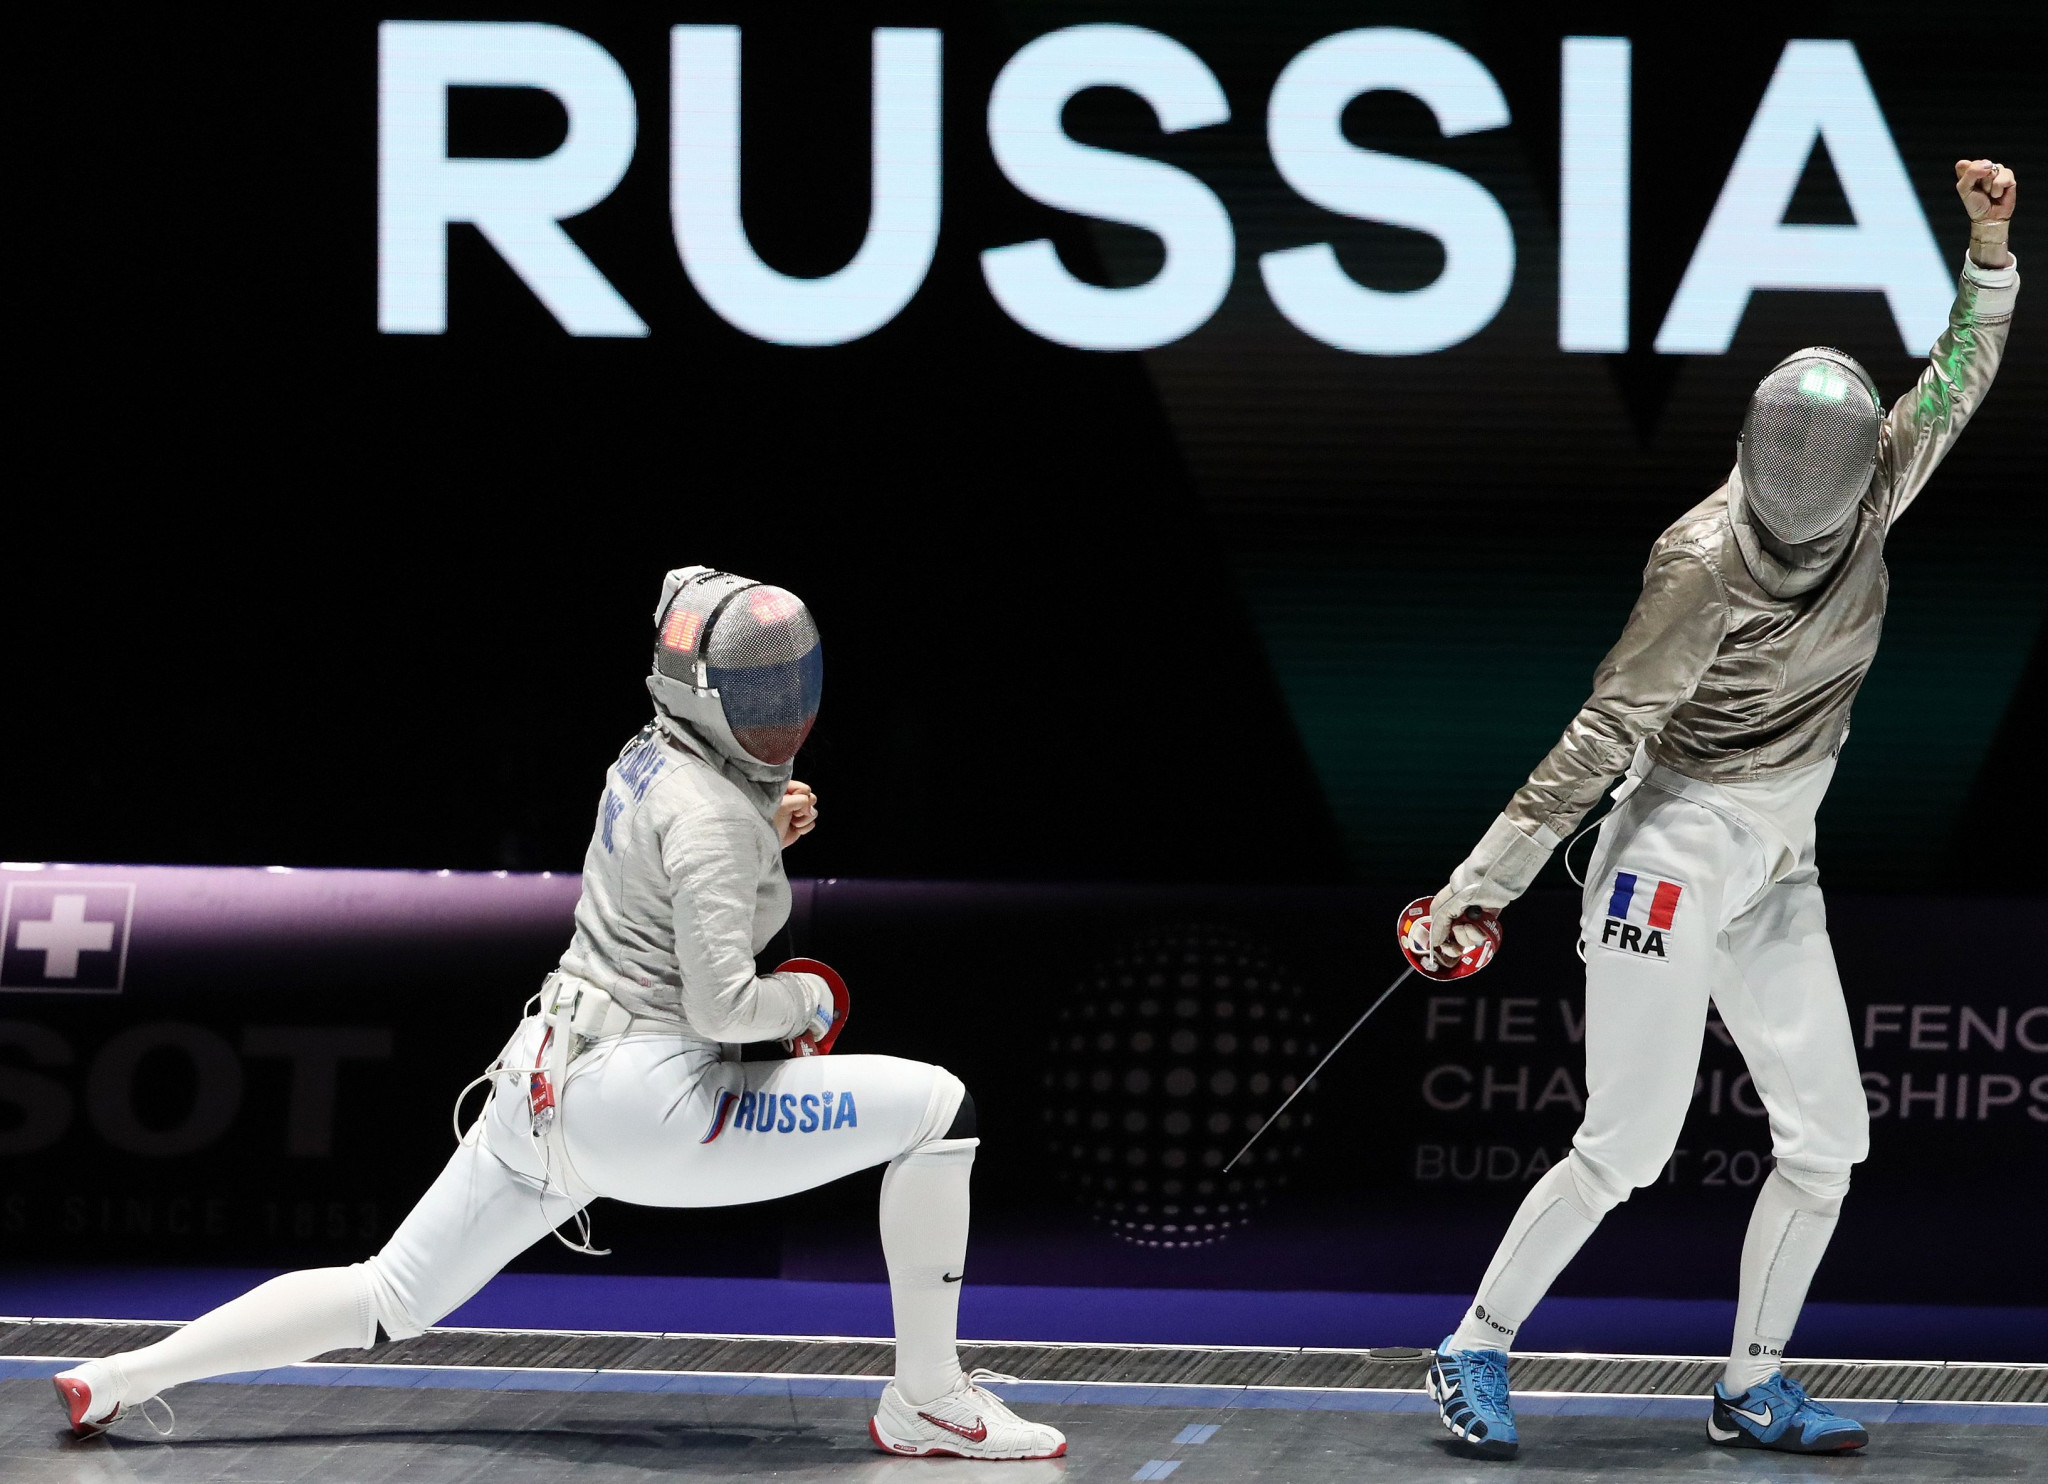 The FIE banned Russian athletes from competing at its sporting events ©Getty Images